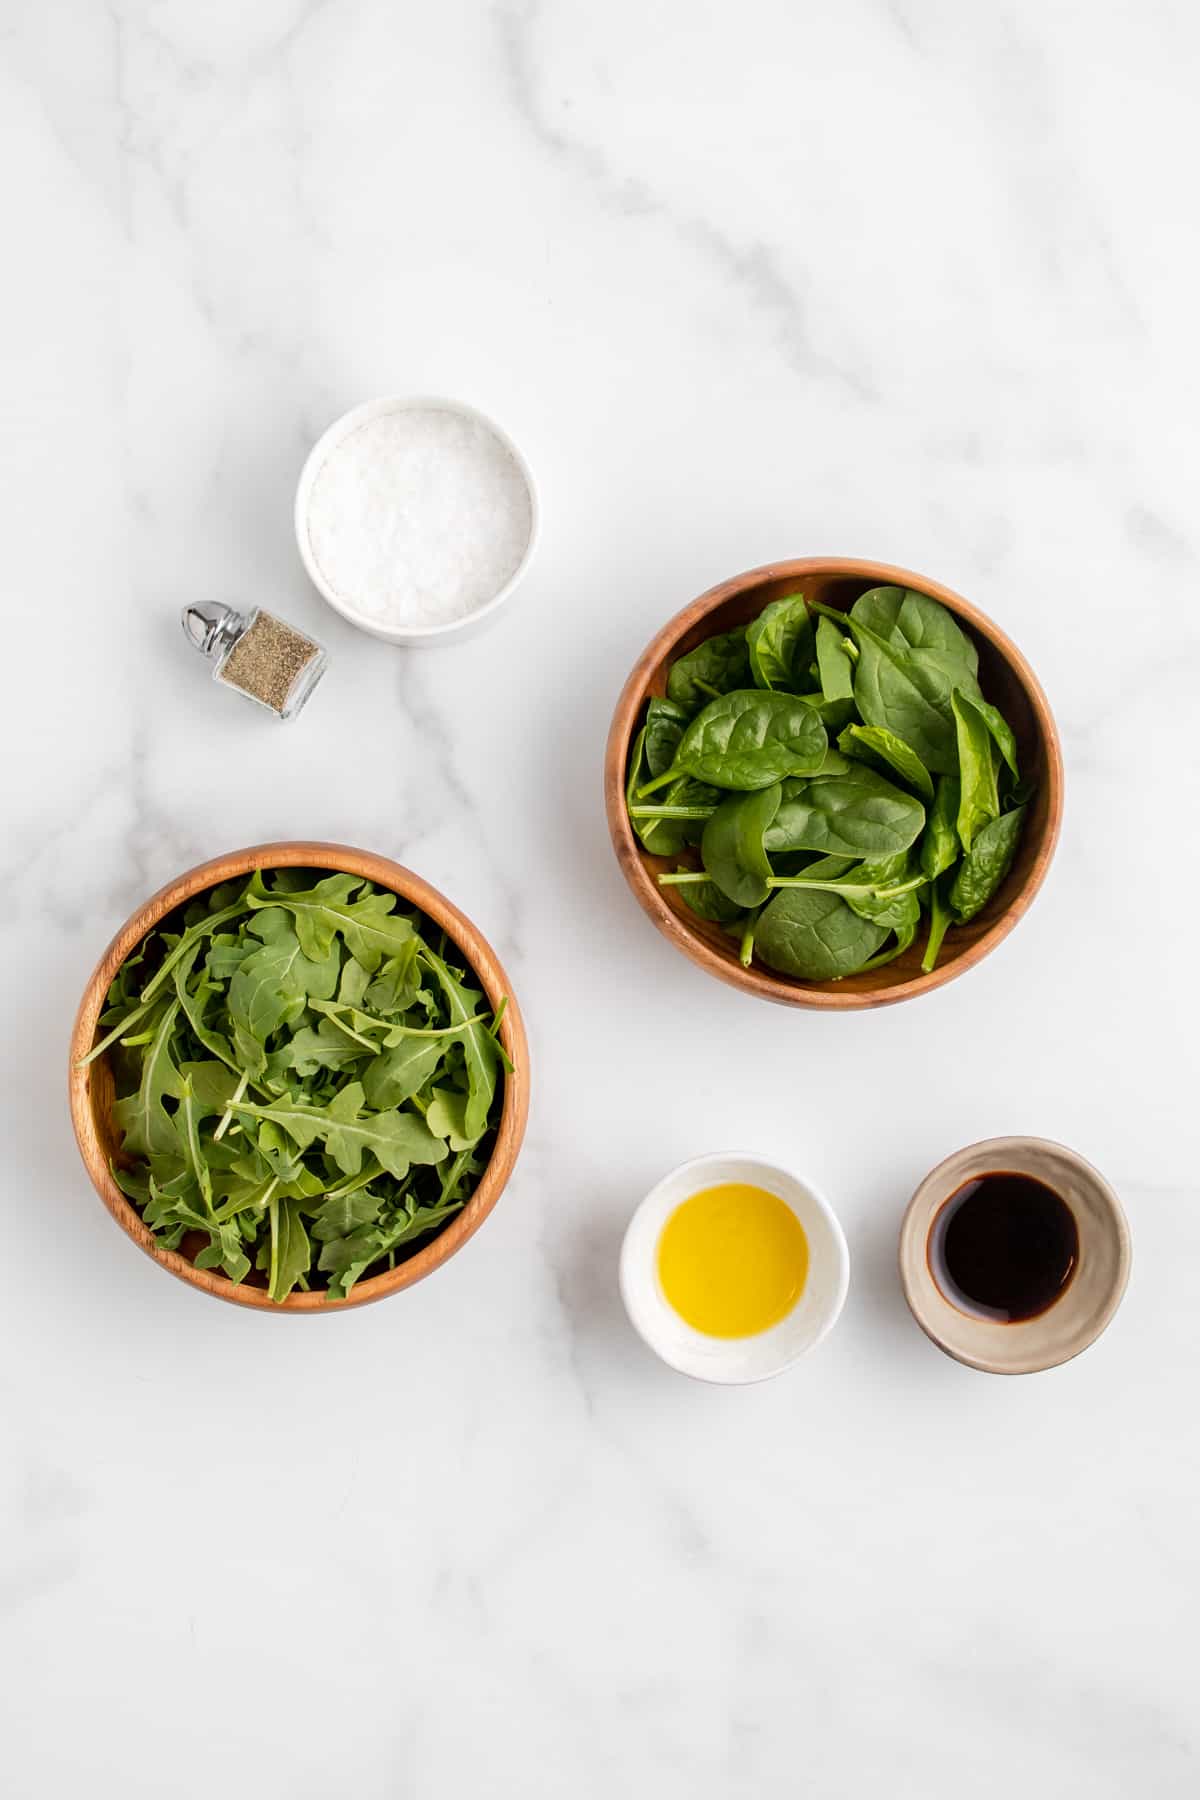 Ingredients needed to make a spinach and arugula salad.